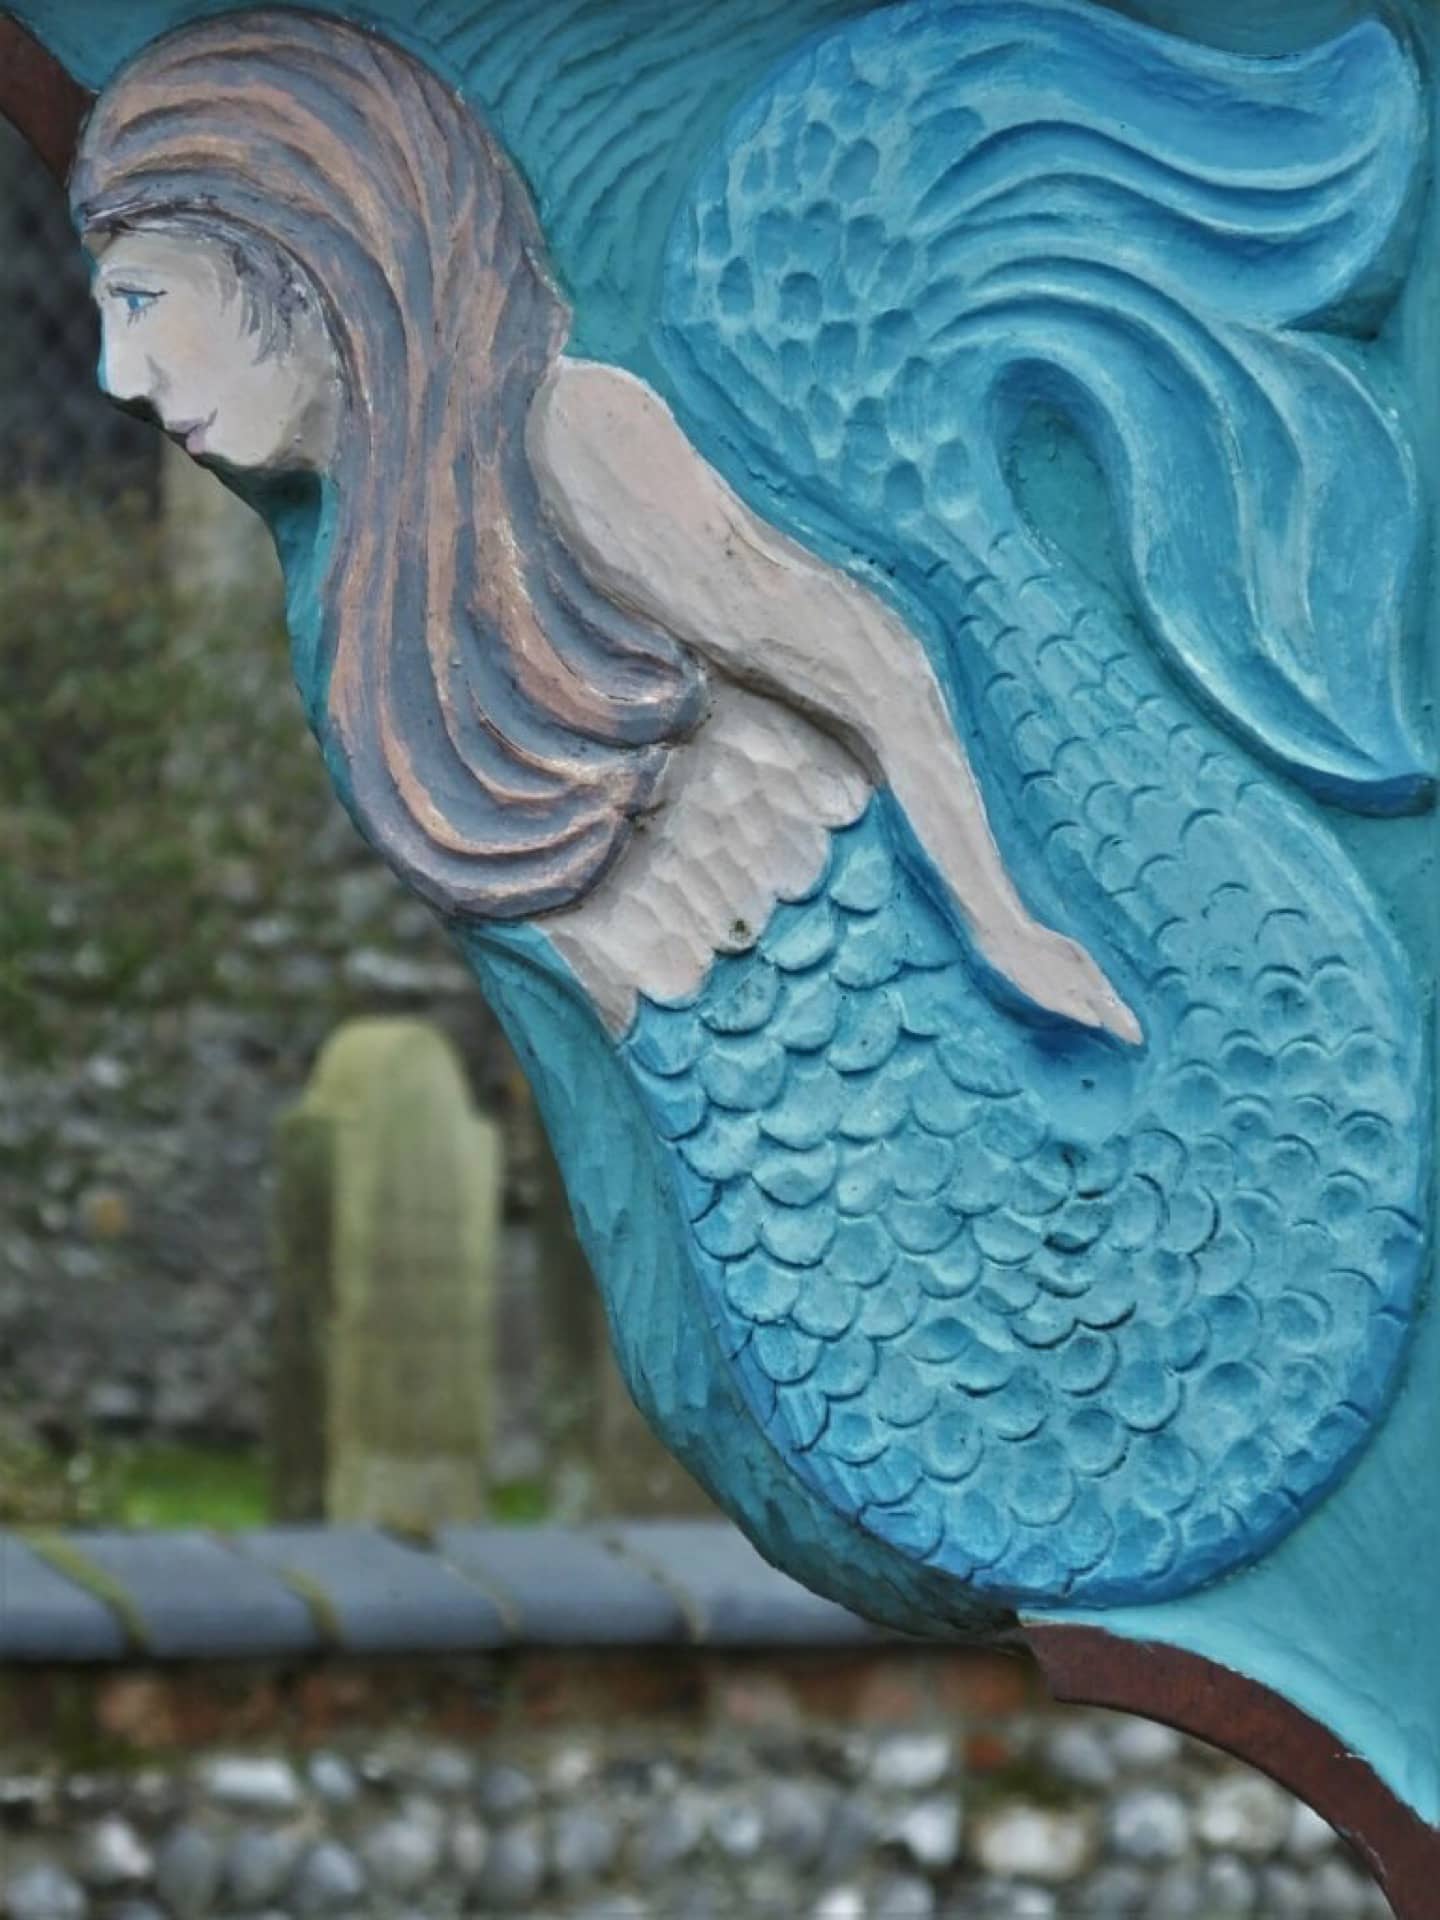 A mermaid carved and painted in Sheringham.